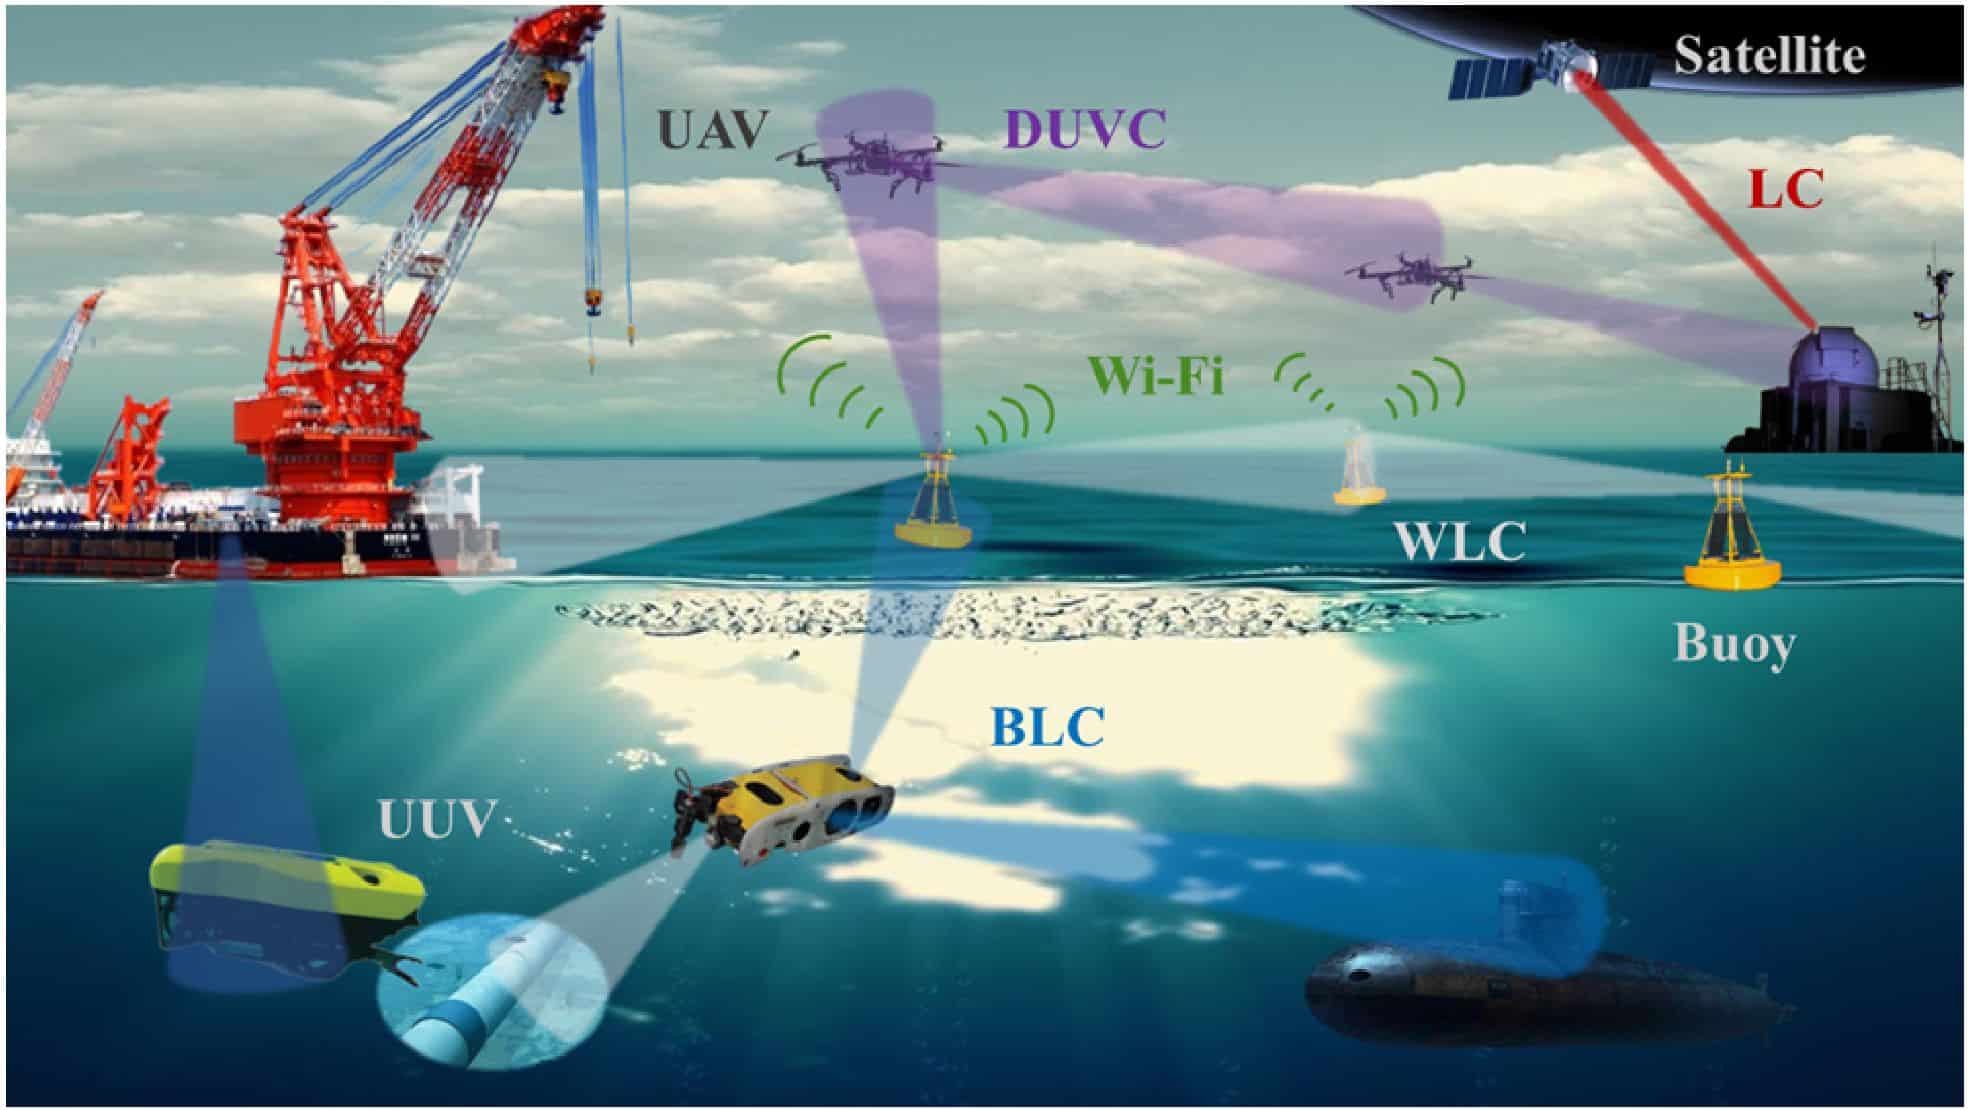 All-optical space-air-sea communication network makes its debut